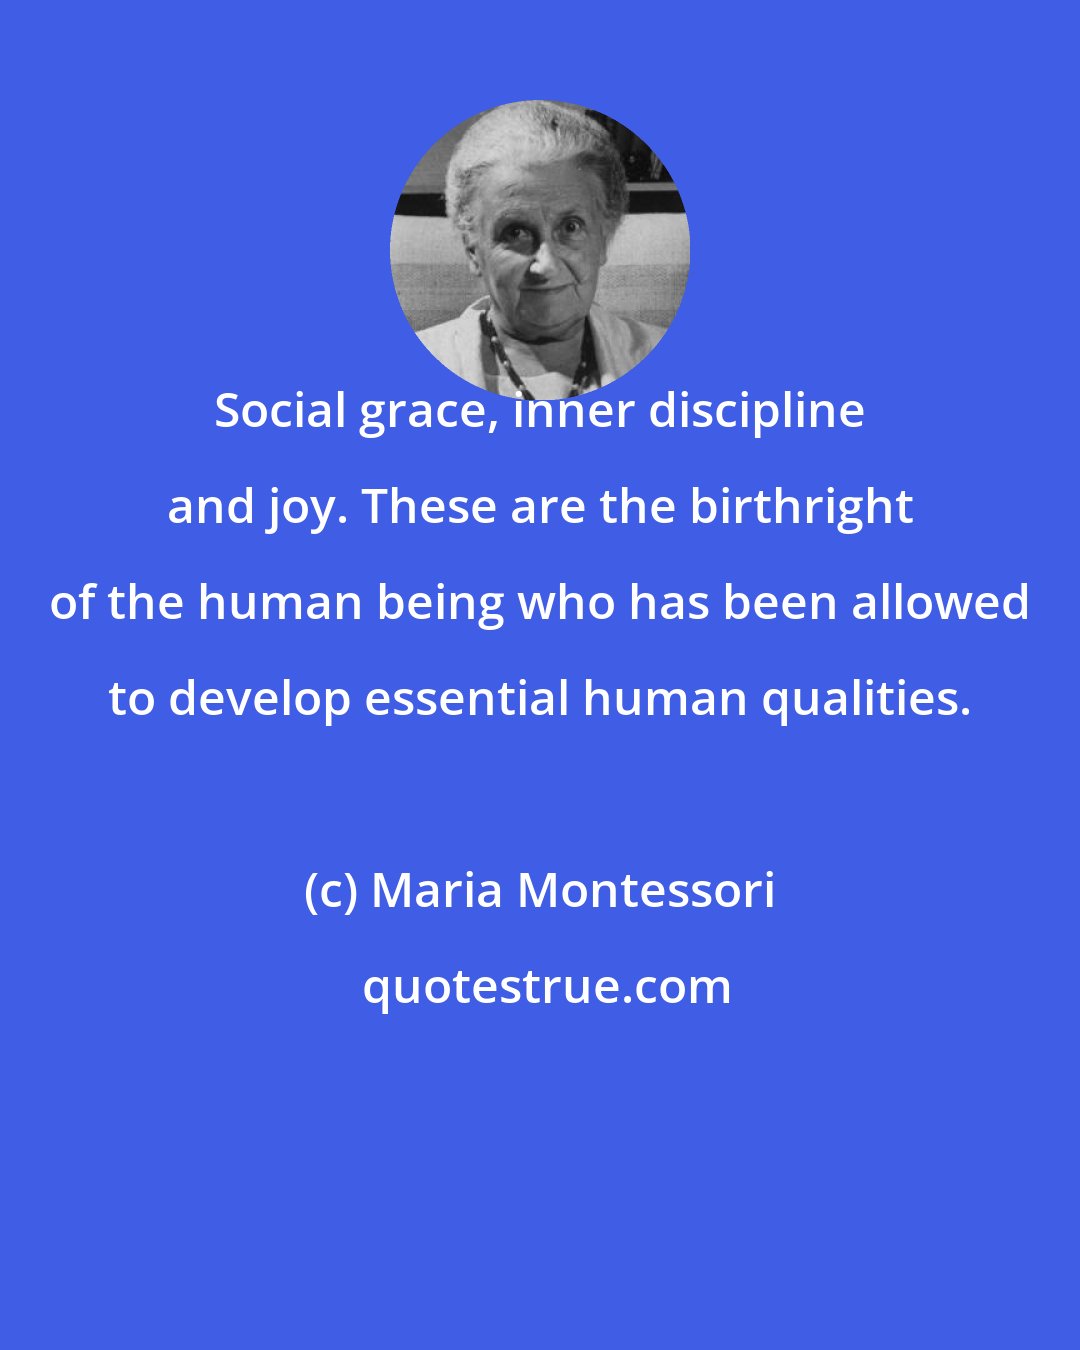 Maria Montessori: Social grace, inner discipline and joy. These are the birthright of the human being who has been allowed to develop essential human qualities.